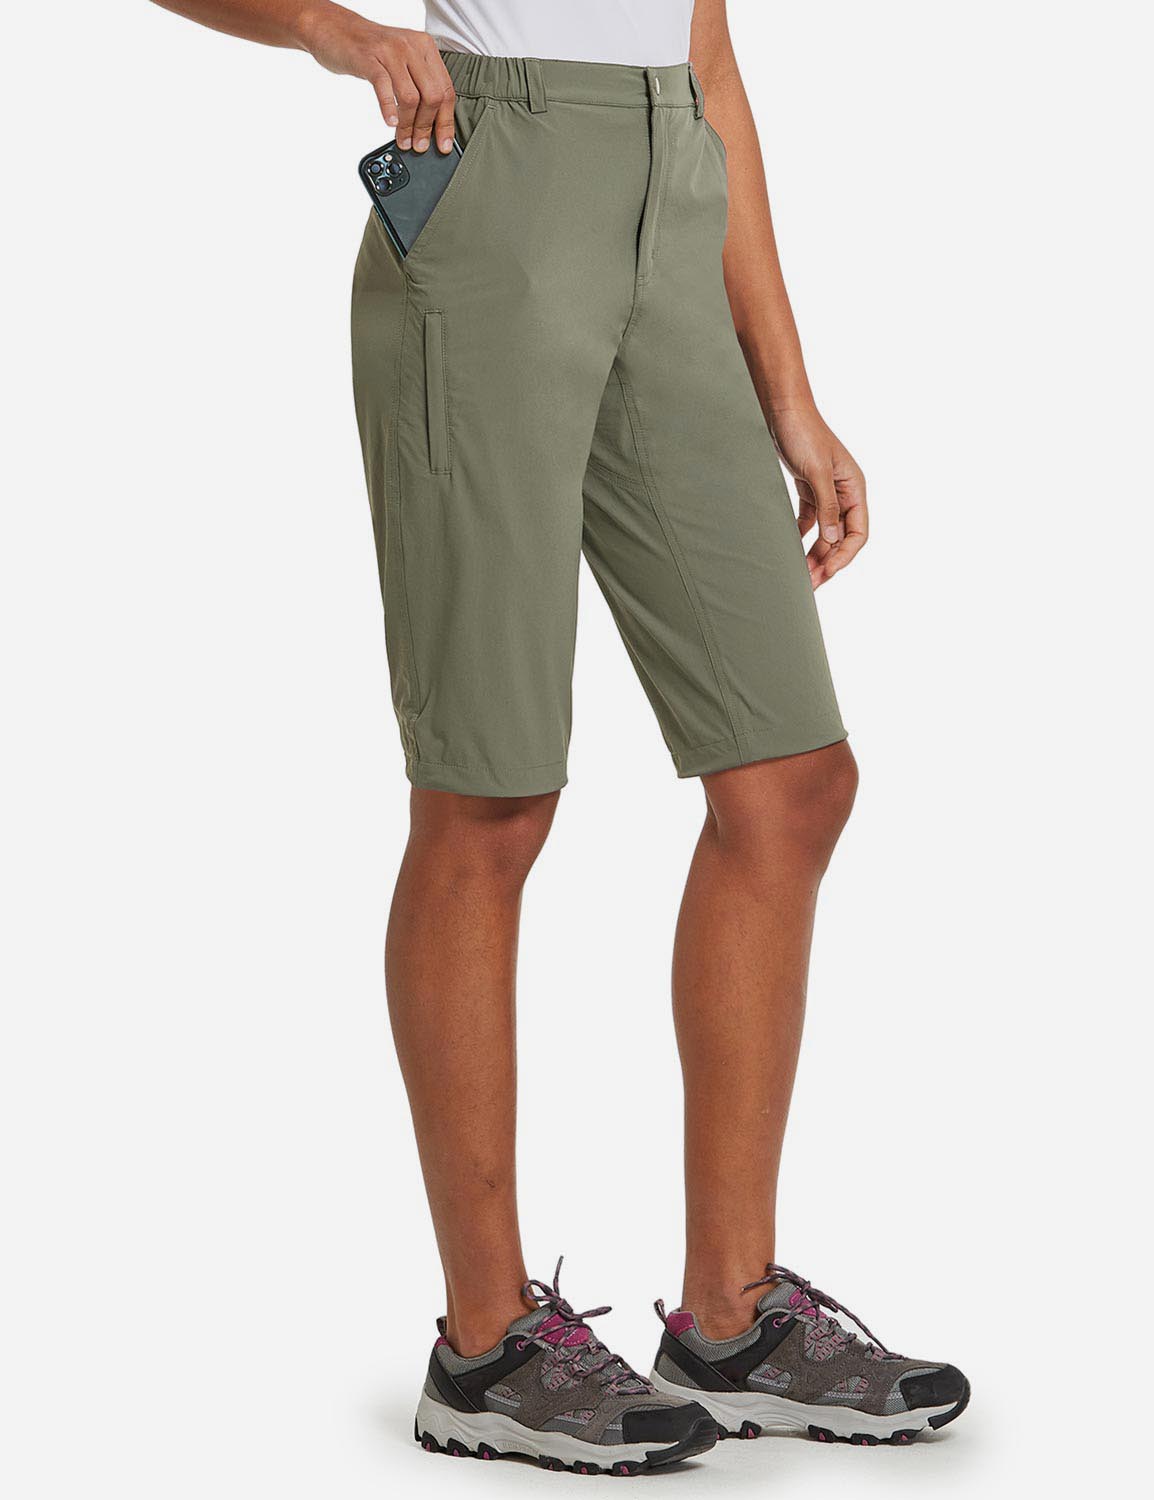 Baleaf Women's UPF50+ Quick Dry DWR Knee High Outdoor Shorts agb035 Sage Green Side